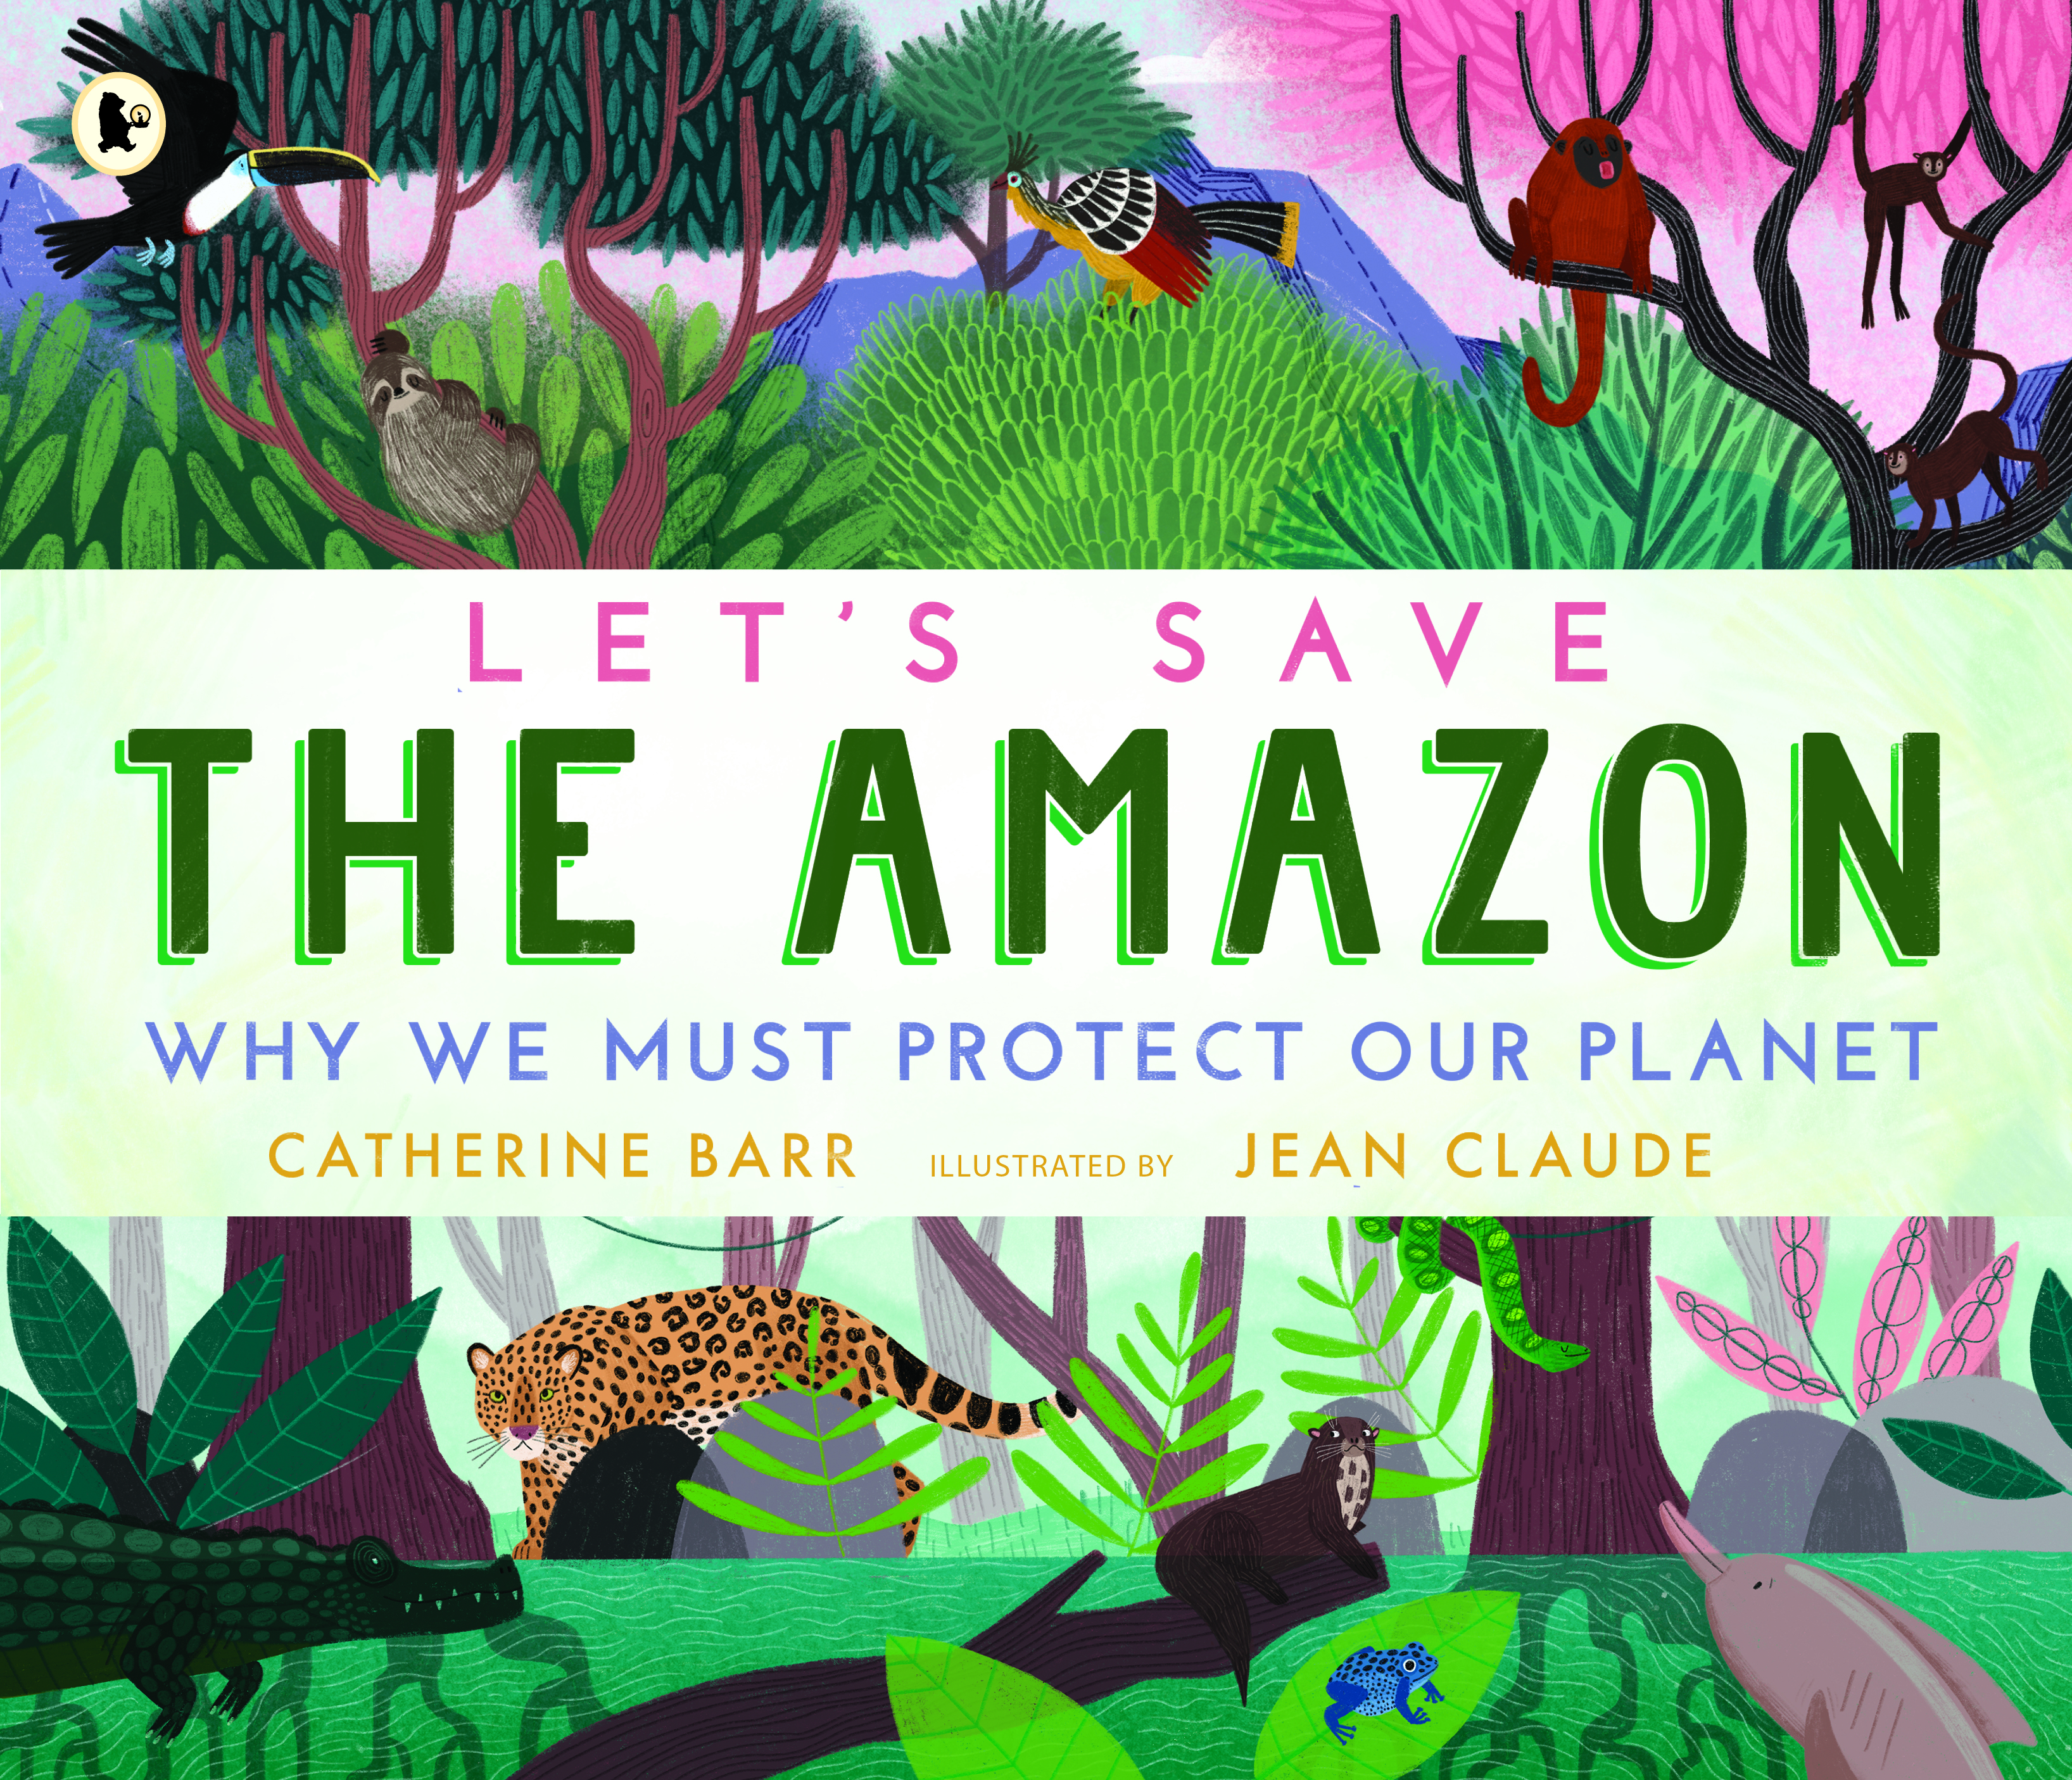 Let-s-Save-the-Amazon-Why-we-must-protect-our-planet